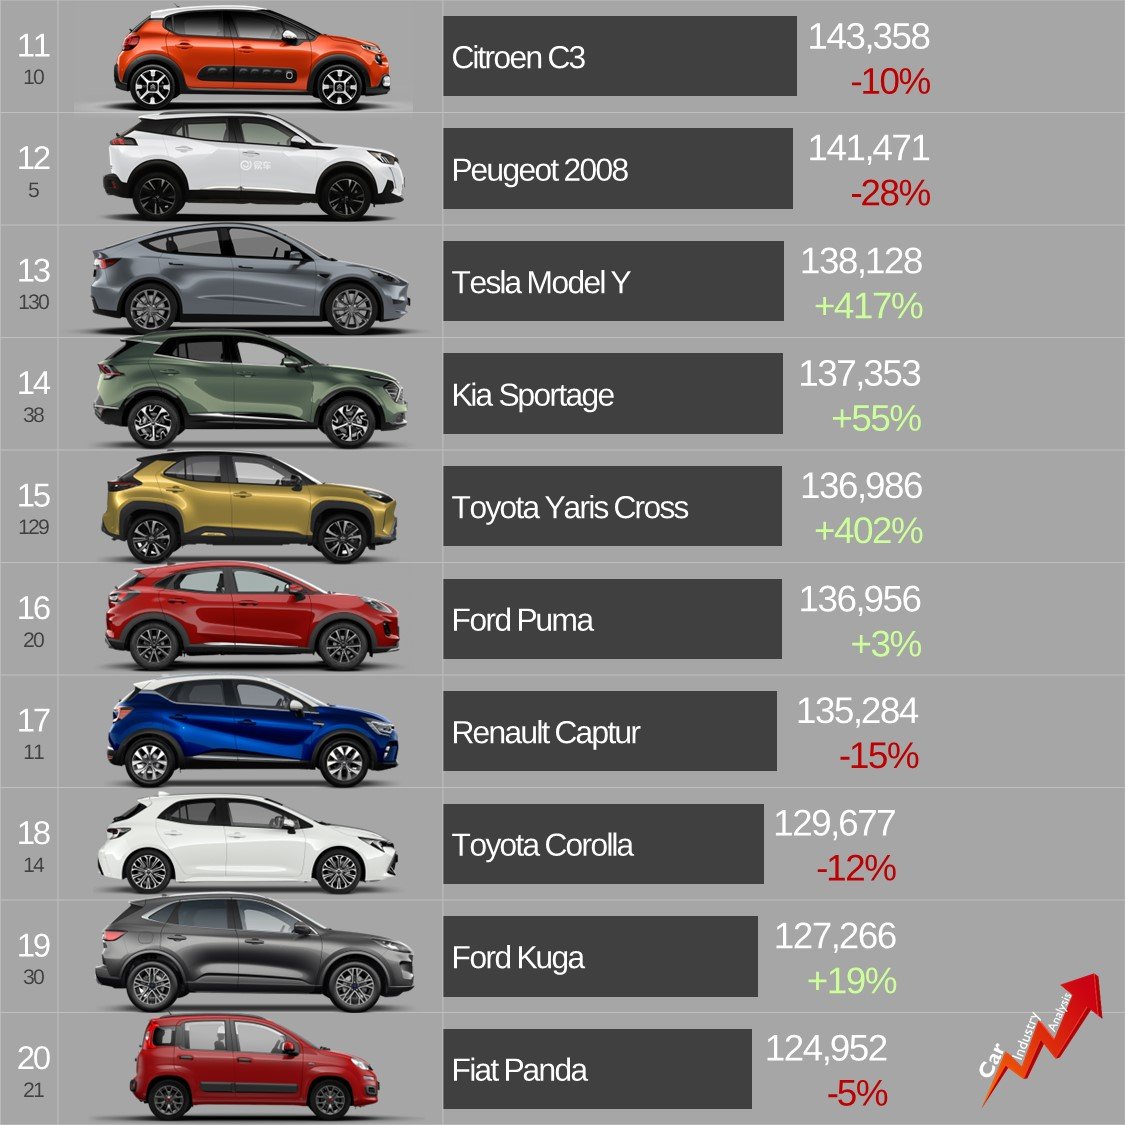 Car Industry Analysis on Twitter: "Check out the top 100 best-selling cars in Europe in 2022: https://t.co/o5FJ2oeTe1 https://t.co/SgdewnEeeu" /